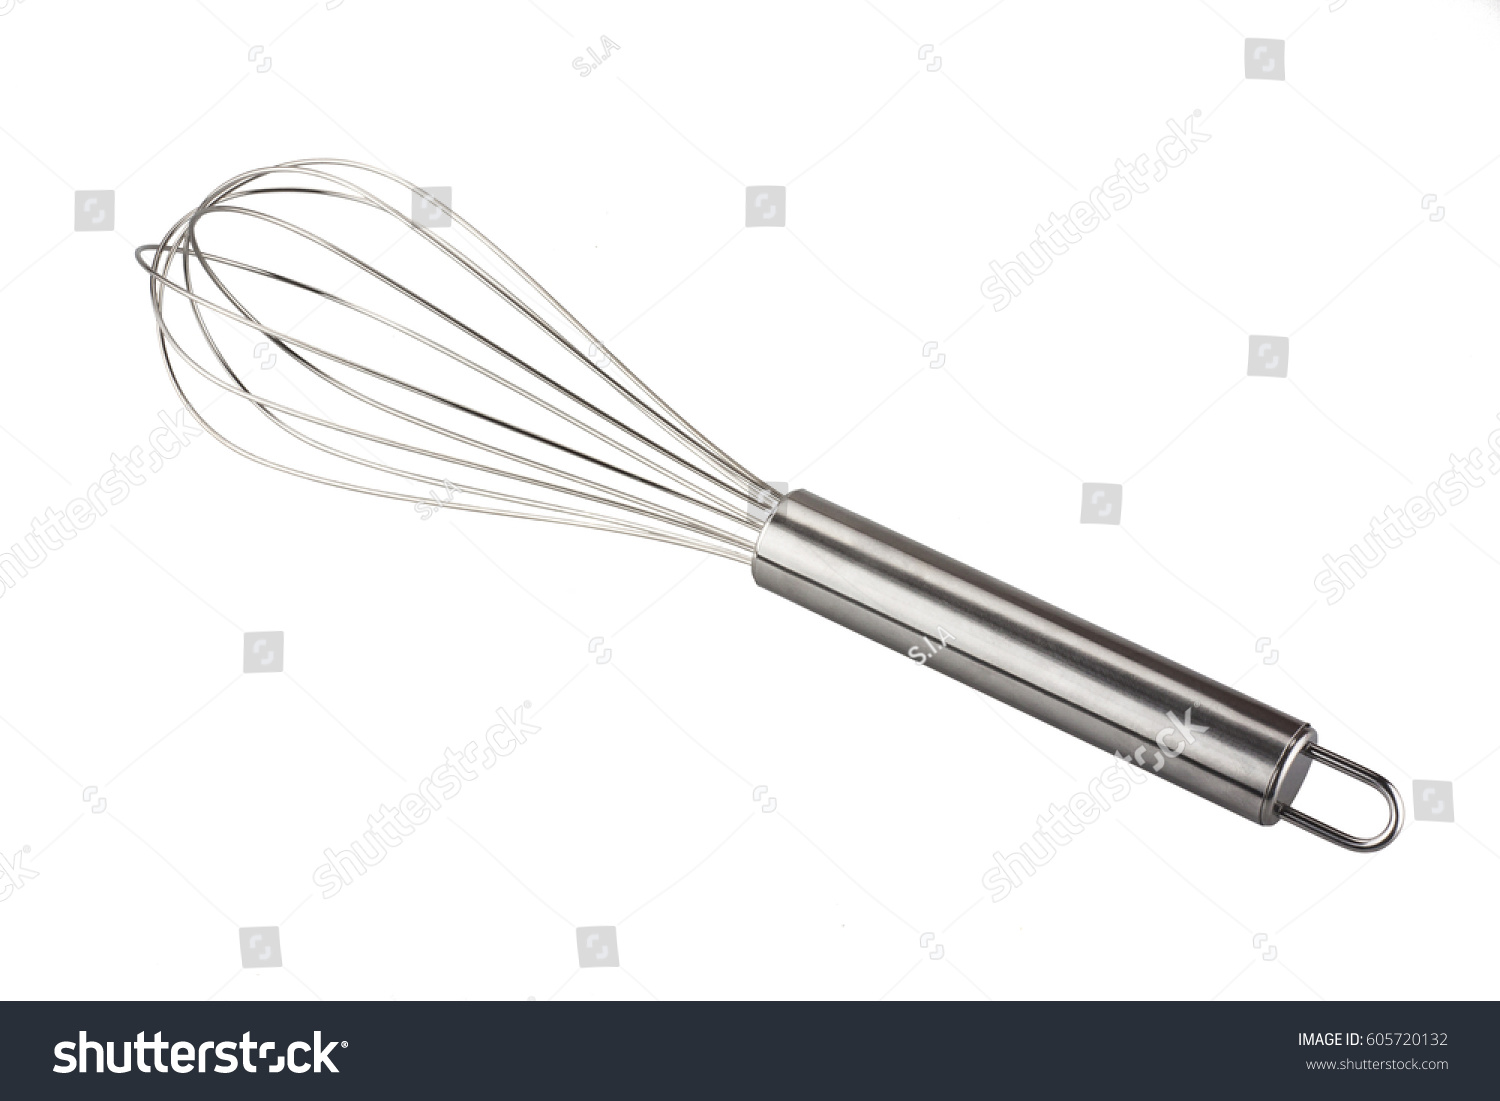 Stainless steel whisk isolated on white background #605720132